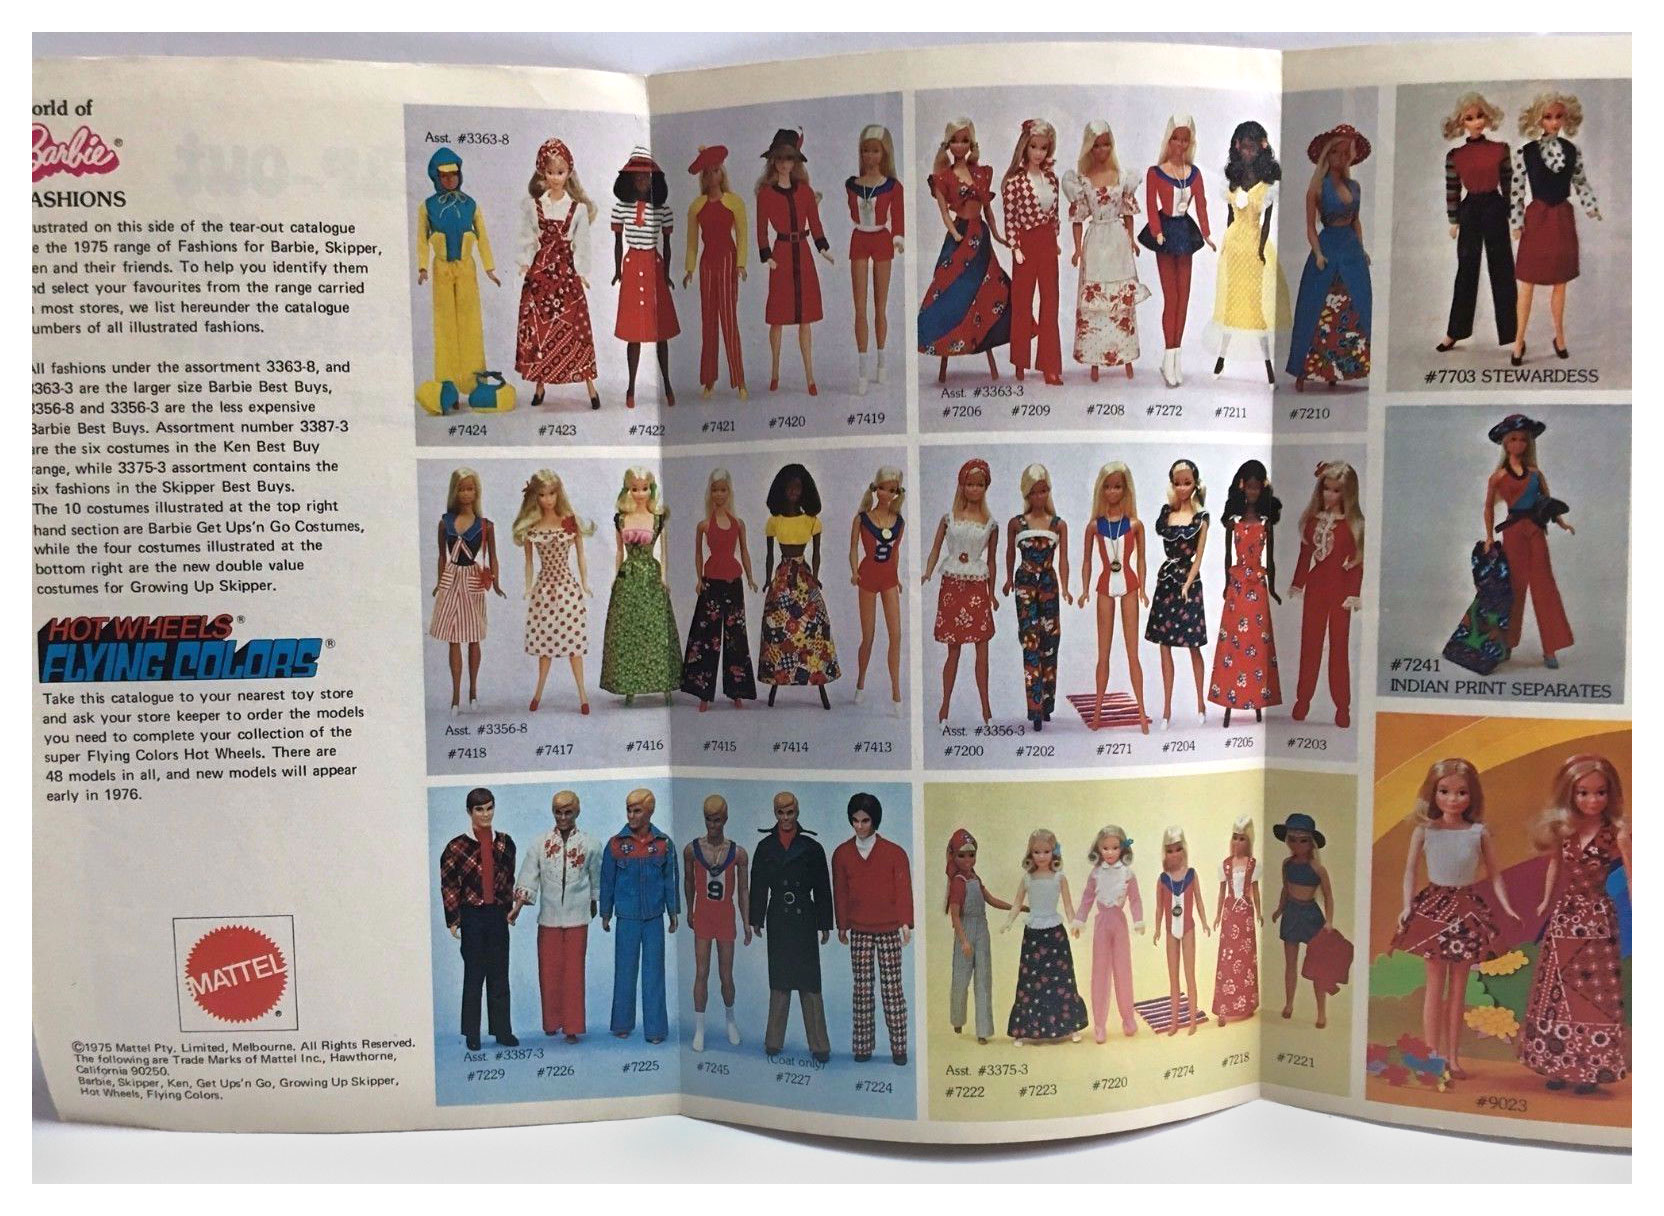 From 1975 Tear-out Mattel Toy catalogue